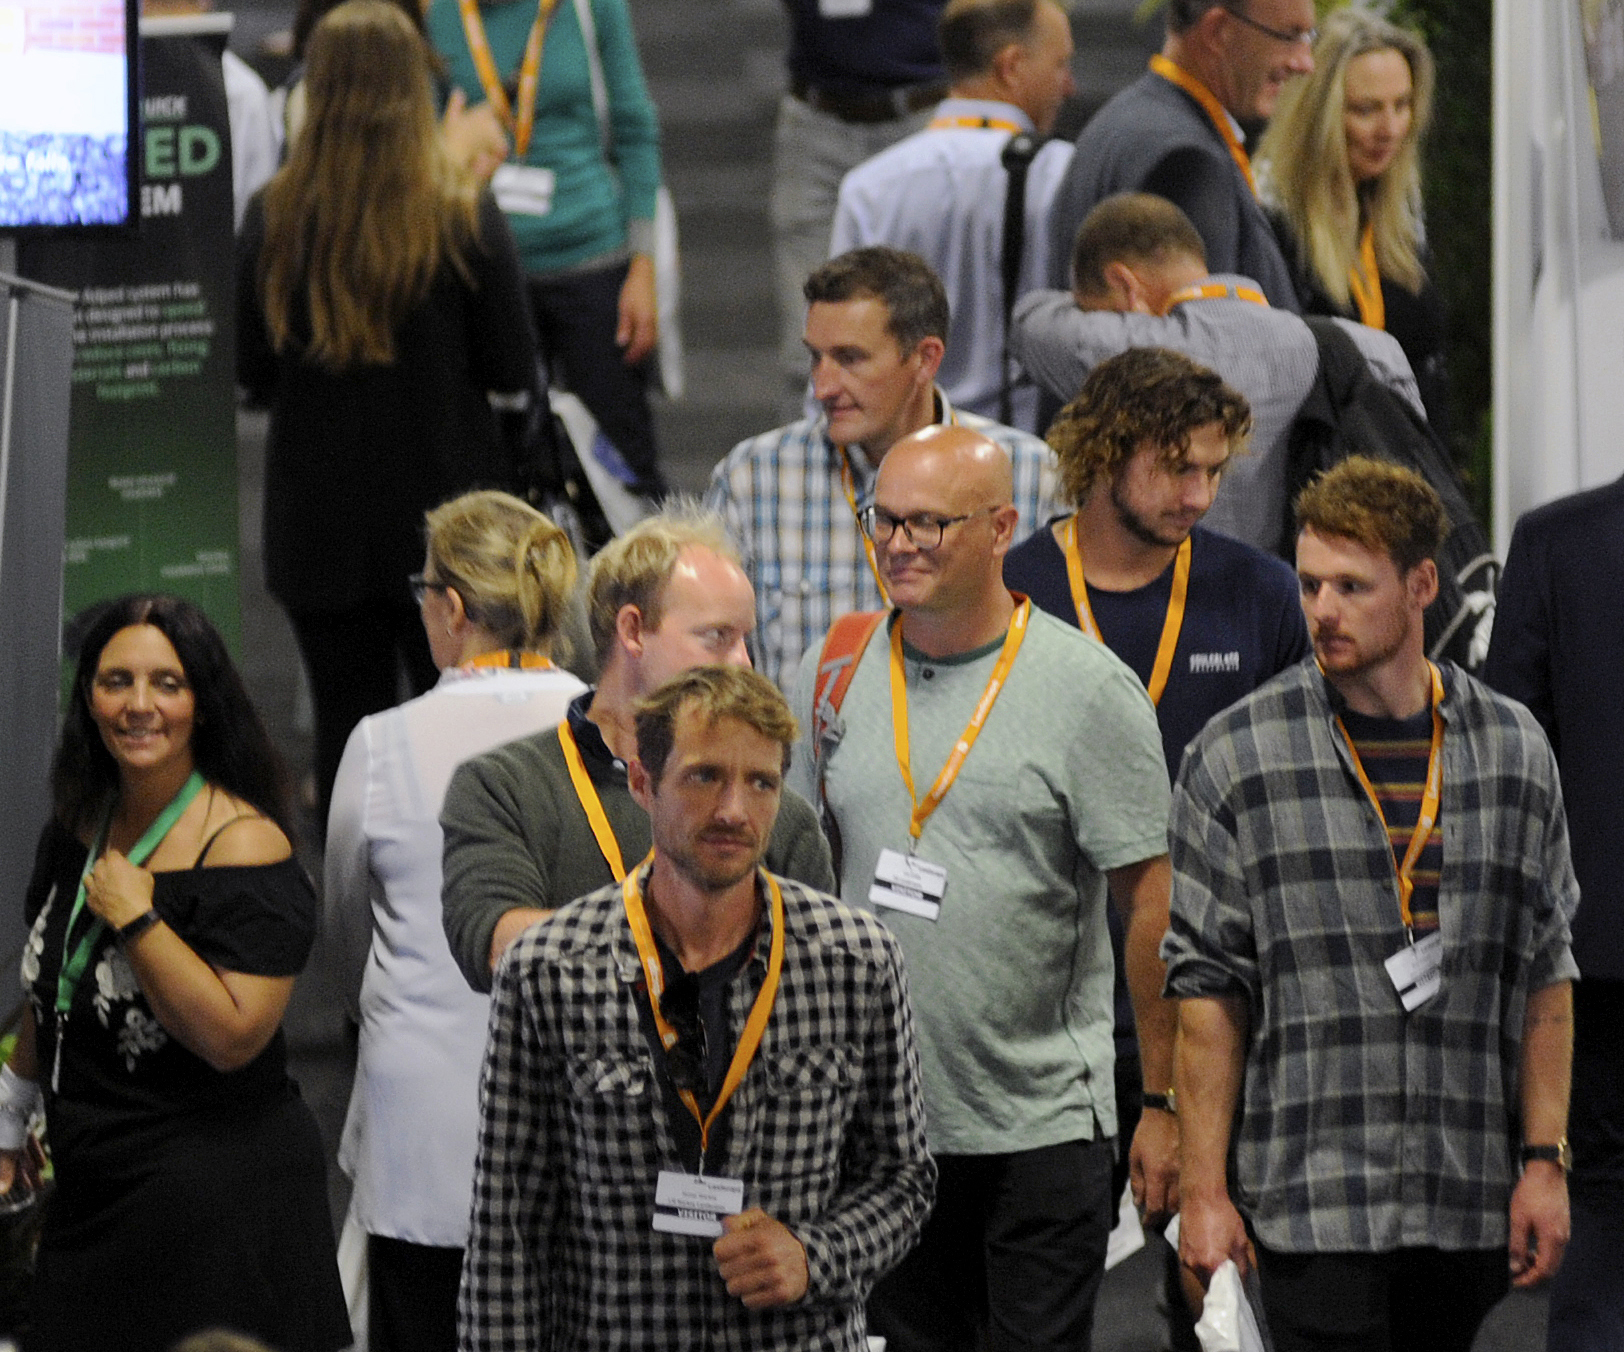 With Hundreds of Exhibitors, Thousands of Products, as well as Meet the Designer & Pecha Kucha Sessions, there are huge opportunities for networking at LANDSCAPE 2019 – and the best part is, it’s all FREE! @LandscapeEvent